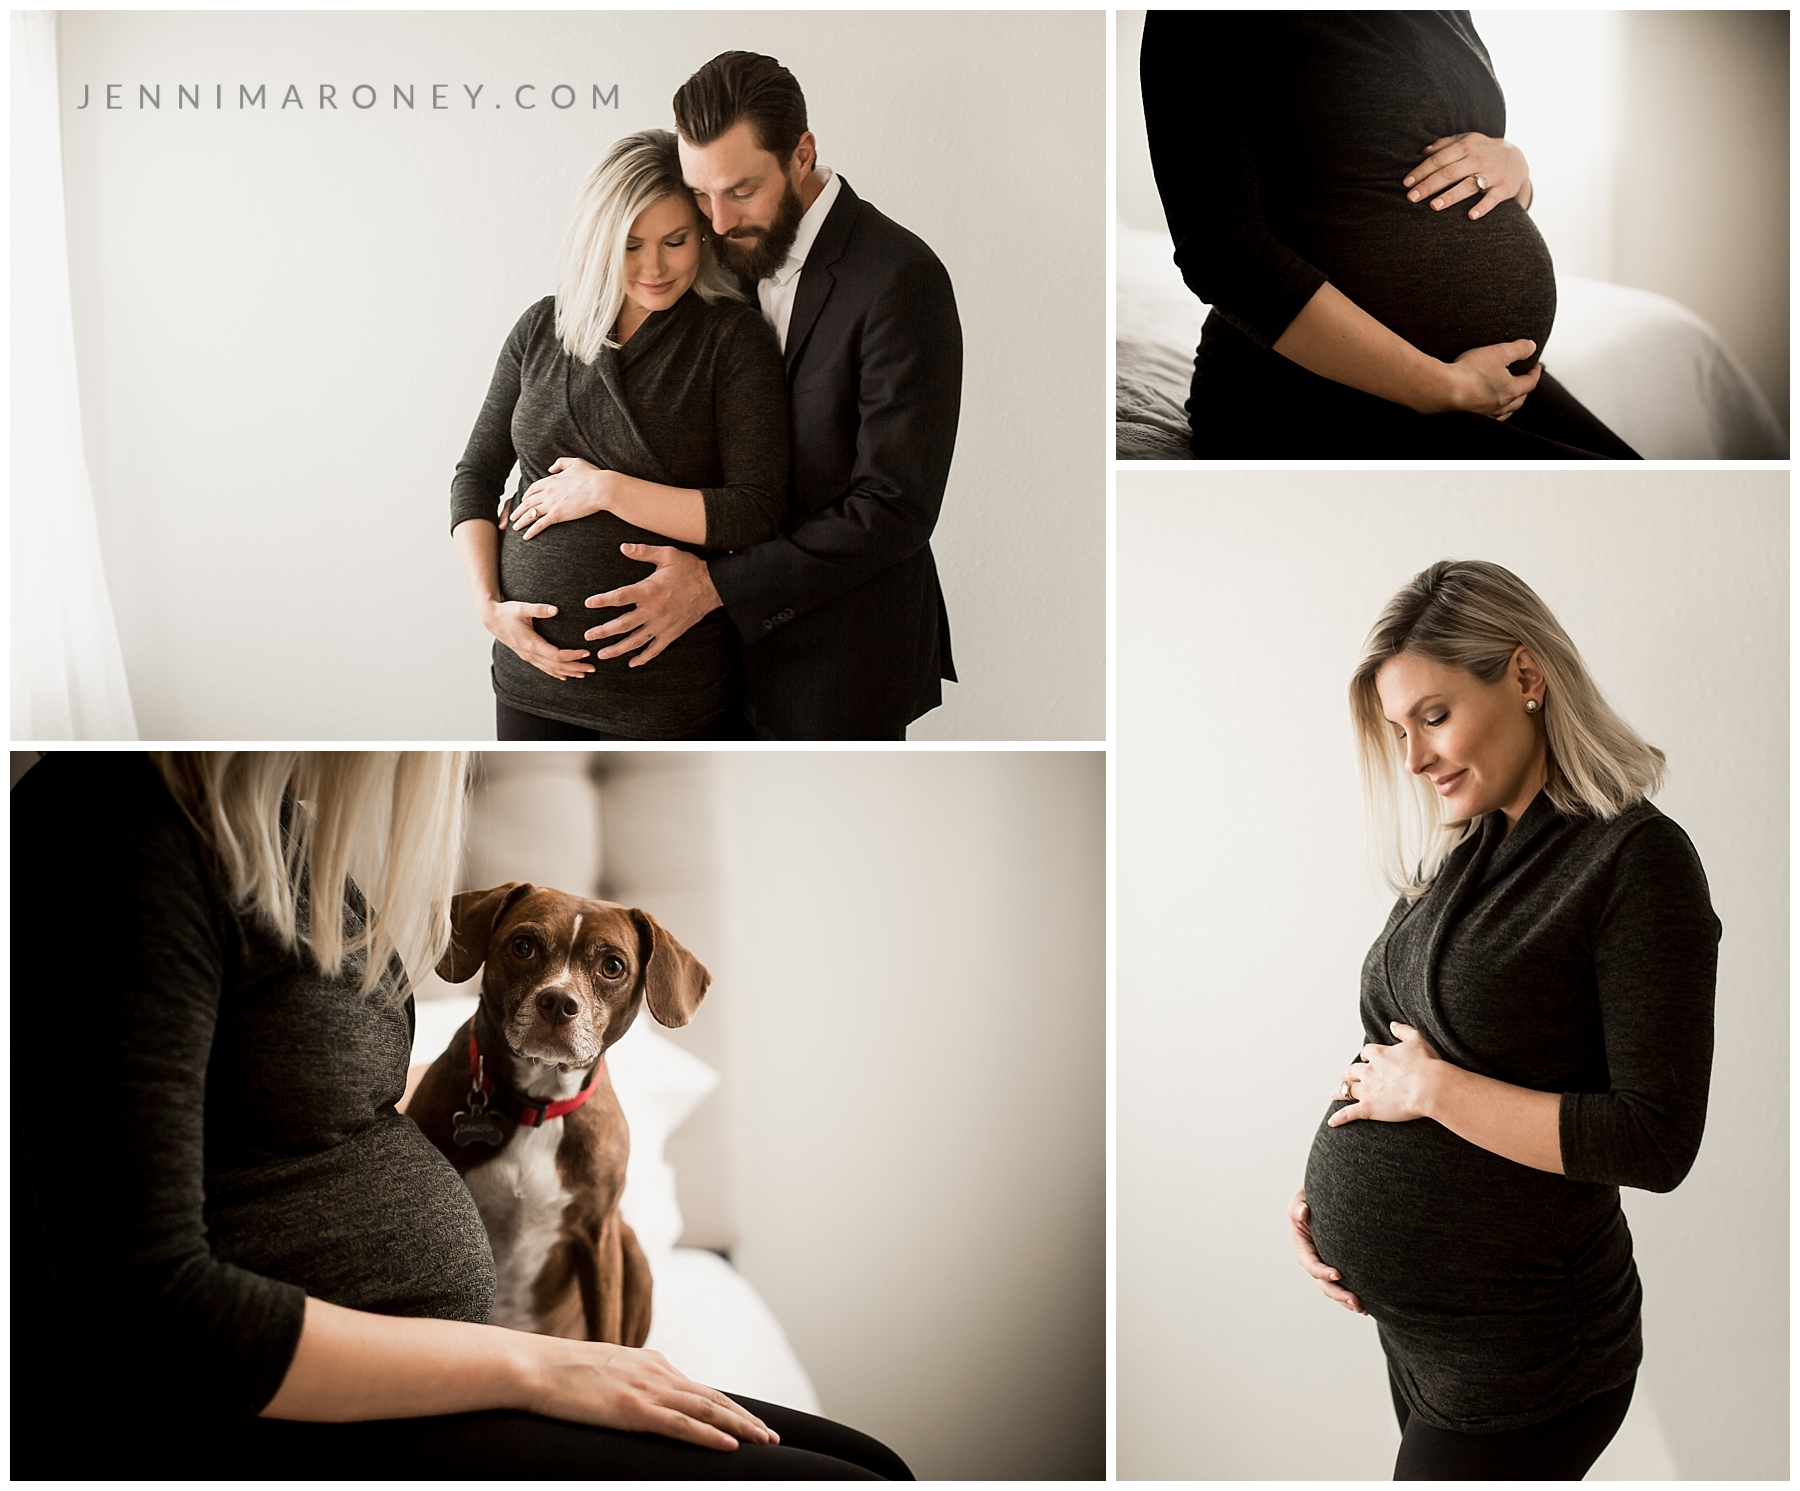 Boulder maternity photos with Boulder maternity photographer and Boulder newborn photographer, Jenni Maroney in her Niwot, Colorado photography studio.